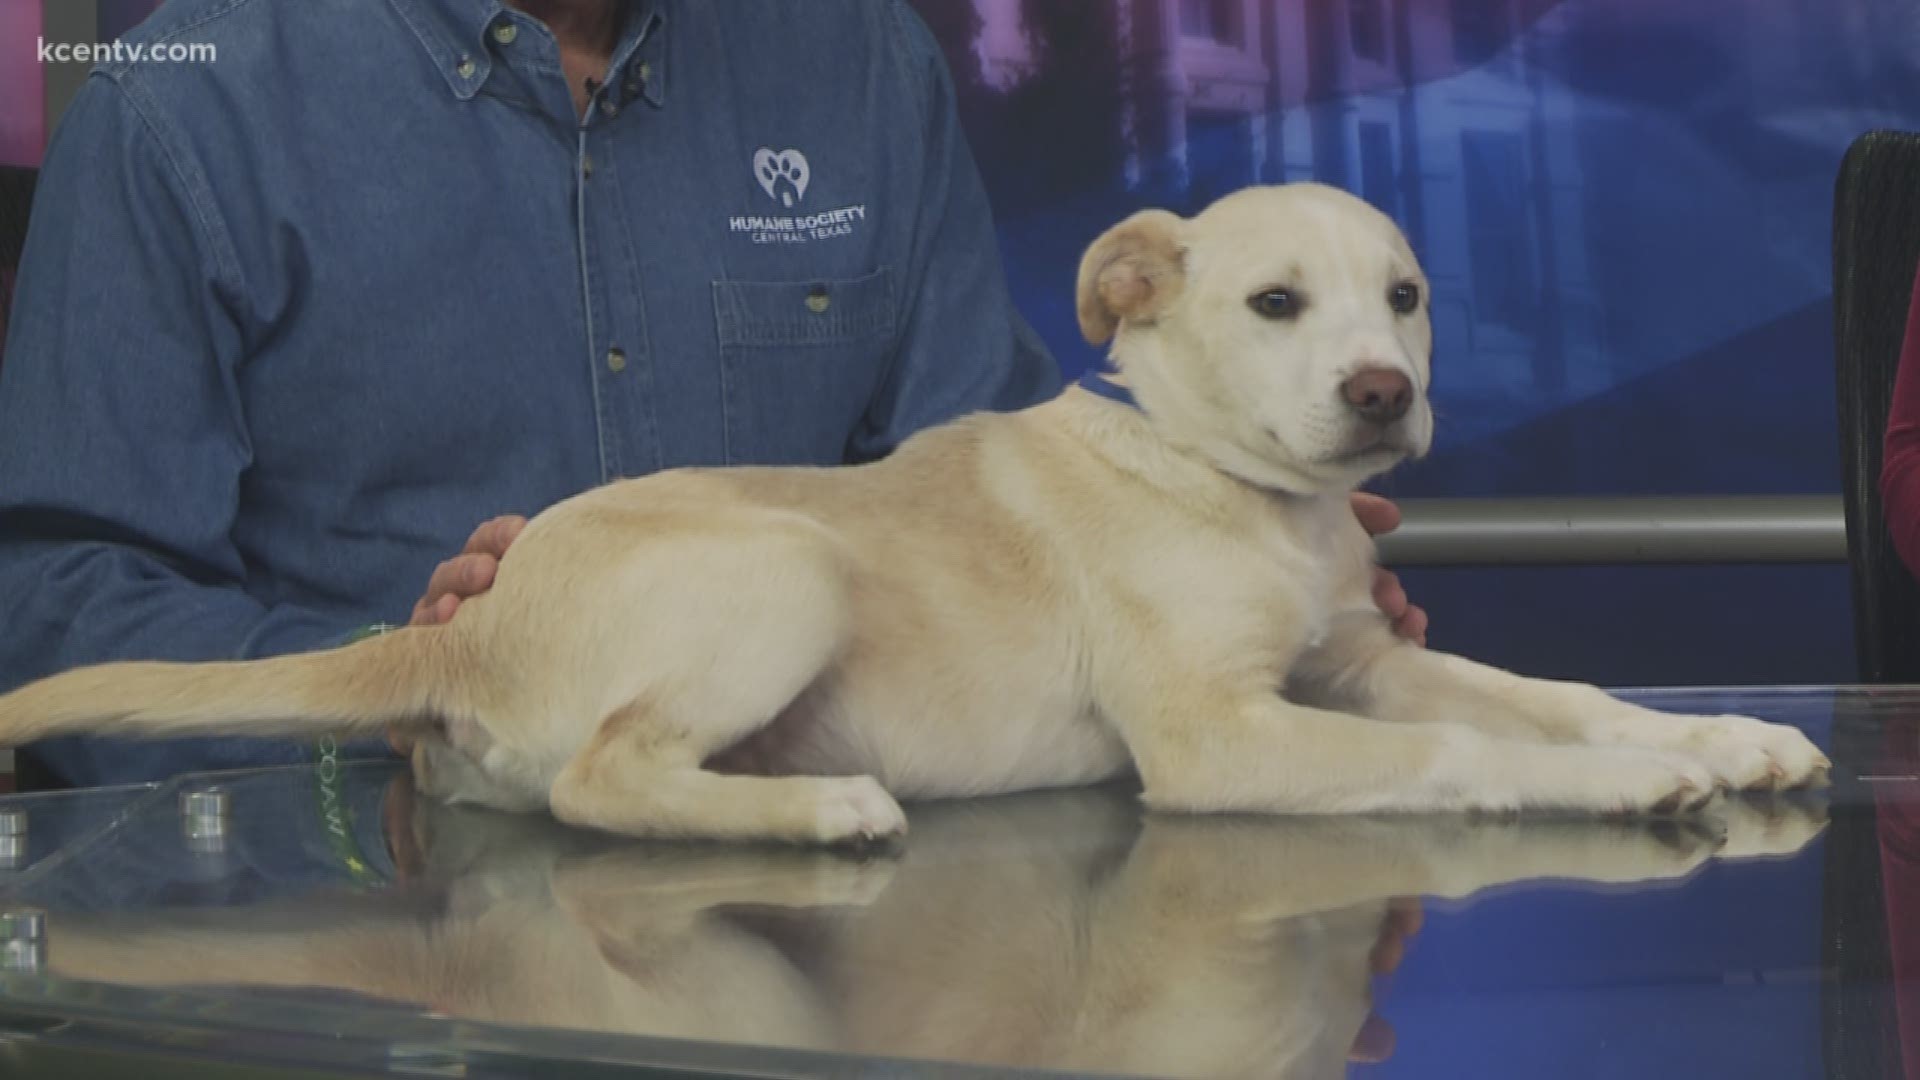 Winter may be coming to an end but "Jon Snow" is full of energy and ready to join a family today, from the Humane Society of Central Texas.